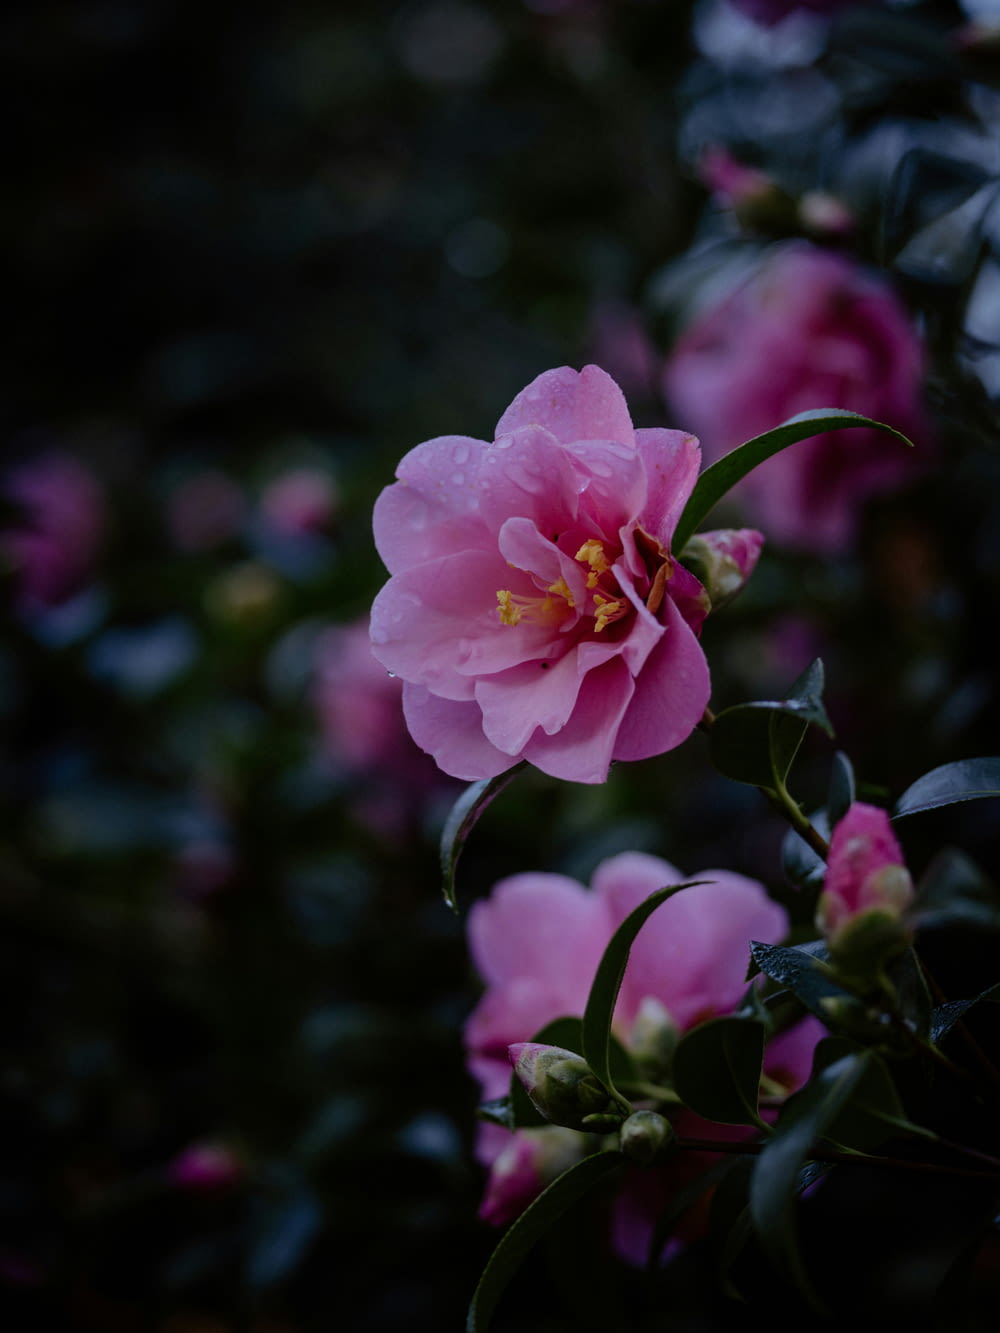 a close up of a pink flower on a bush